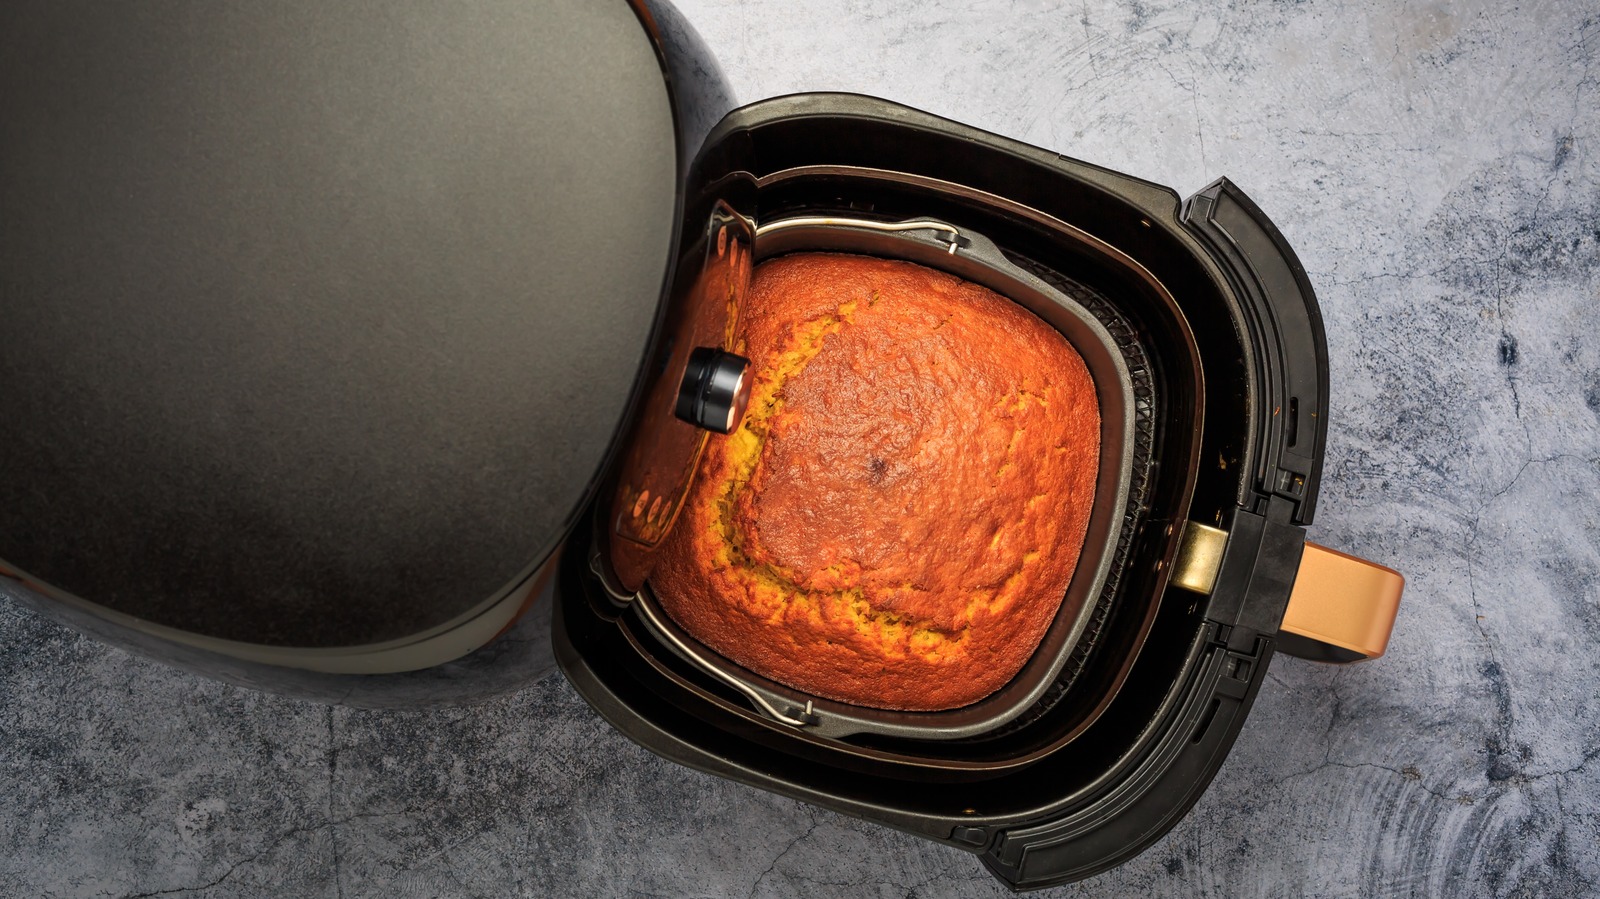 https://www.tastingtable.com/img/gallery/8-tips-you-need-to-bake-a-cake-in-you-air-fryer/l-intro-1695834122.jpg